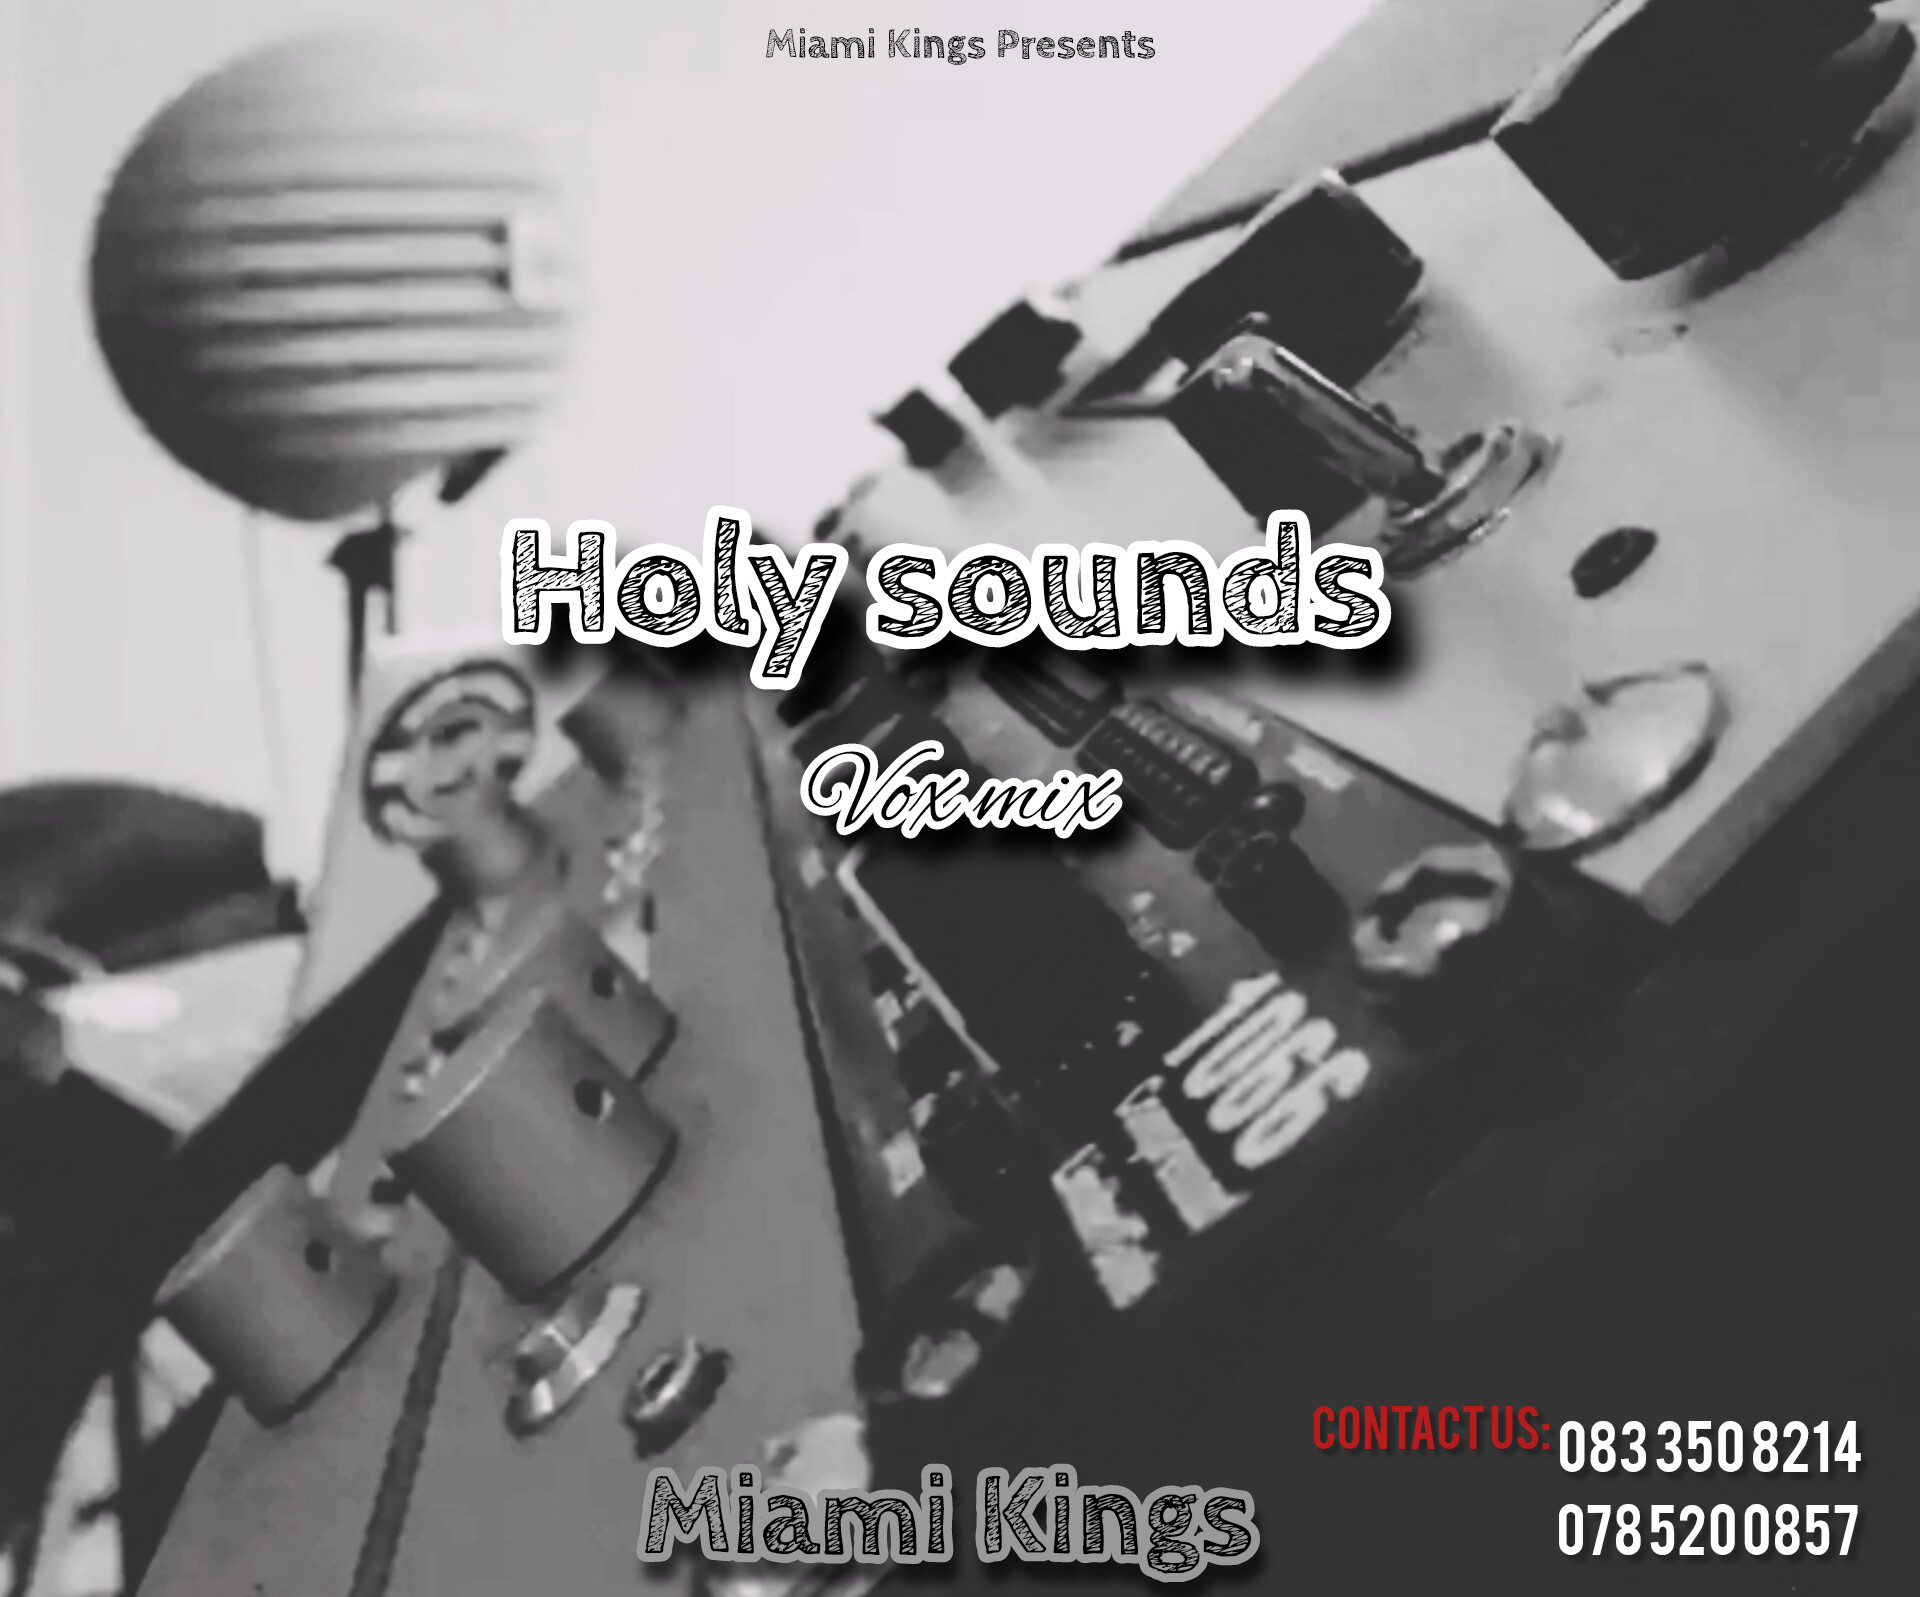 Holy sounds_[_vox_mix_] - Miami kings